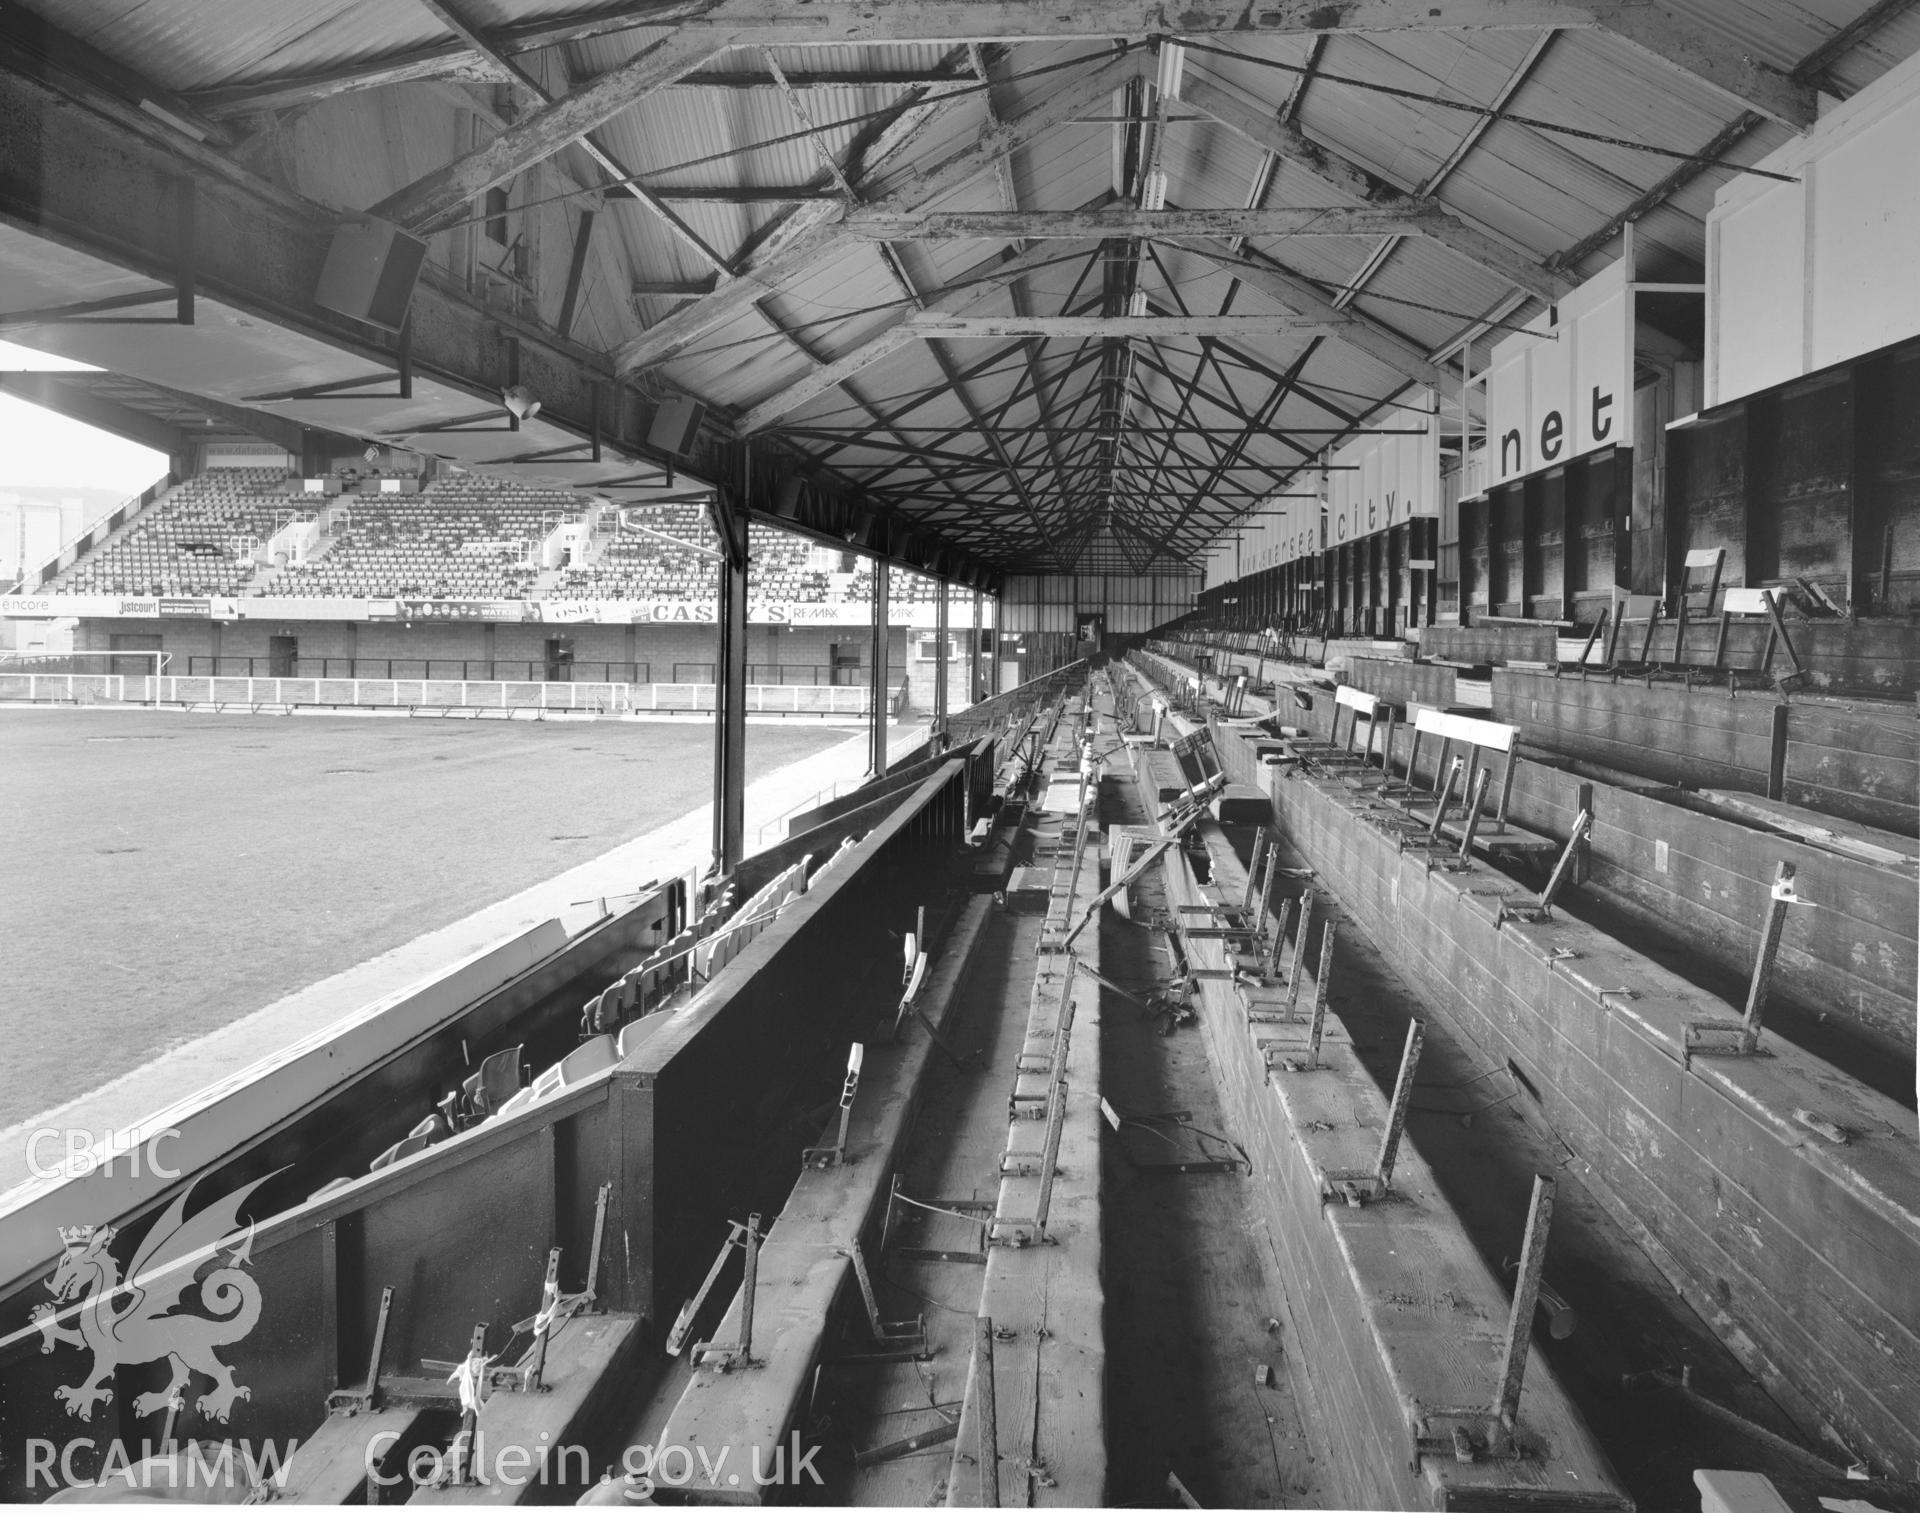 South Stand, interiior seating and roof.